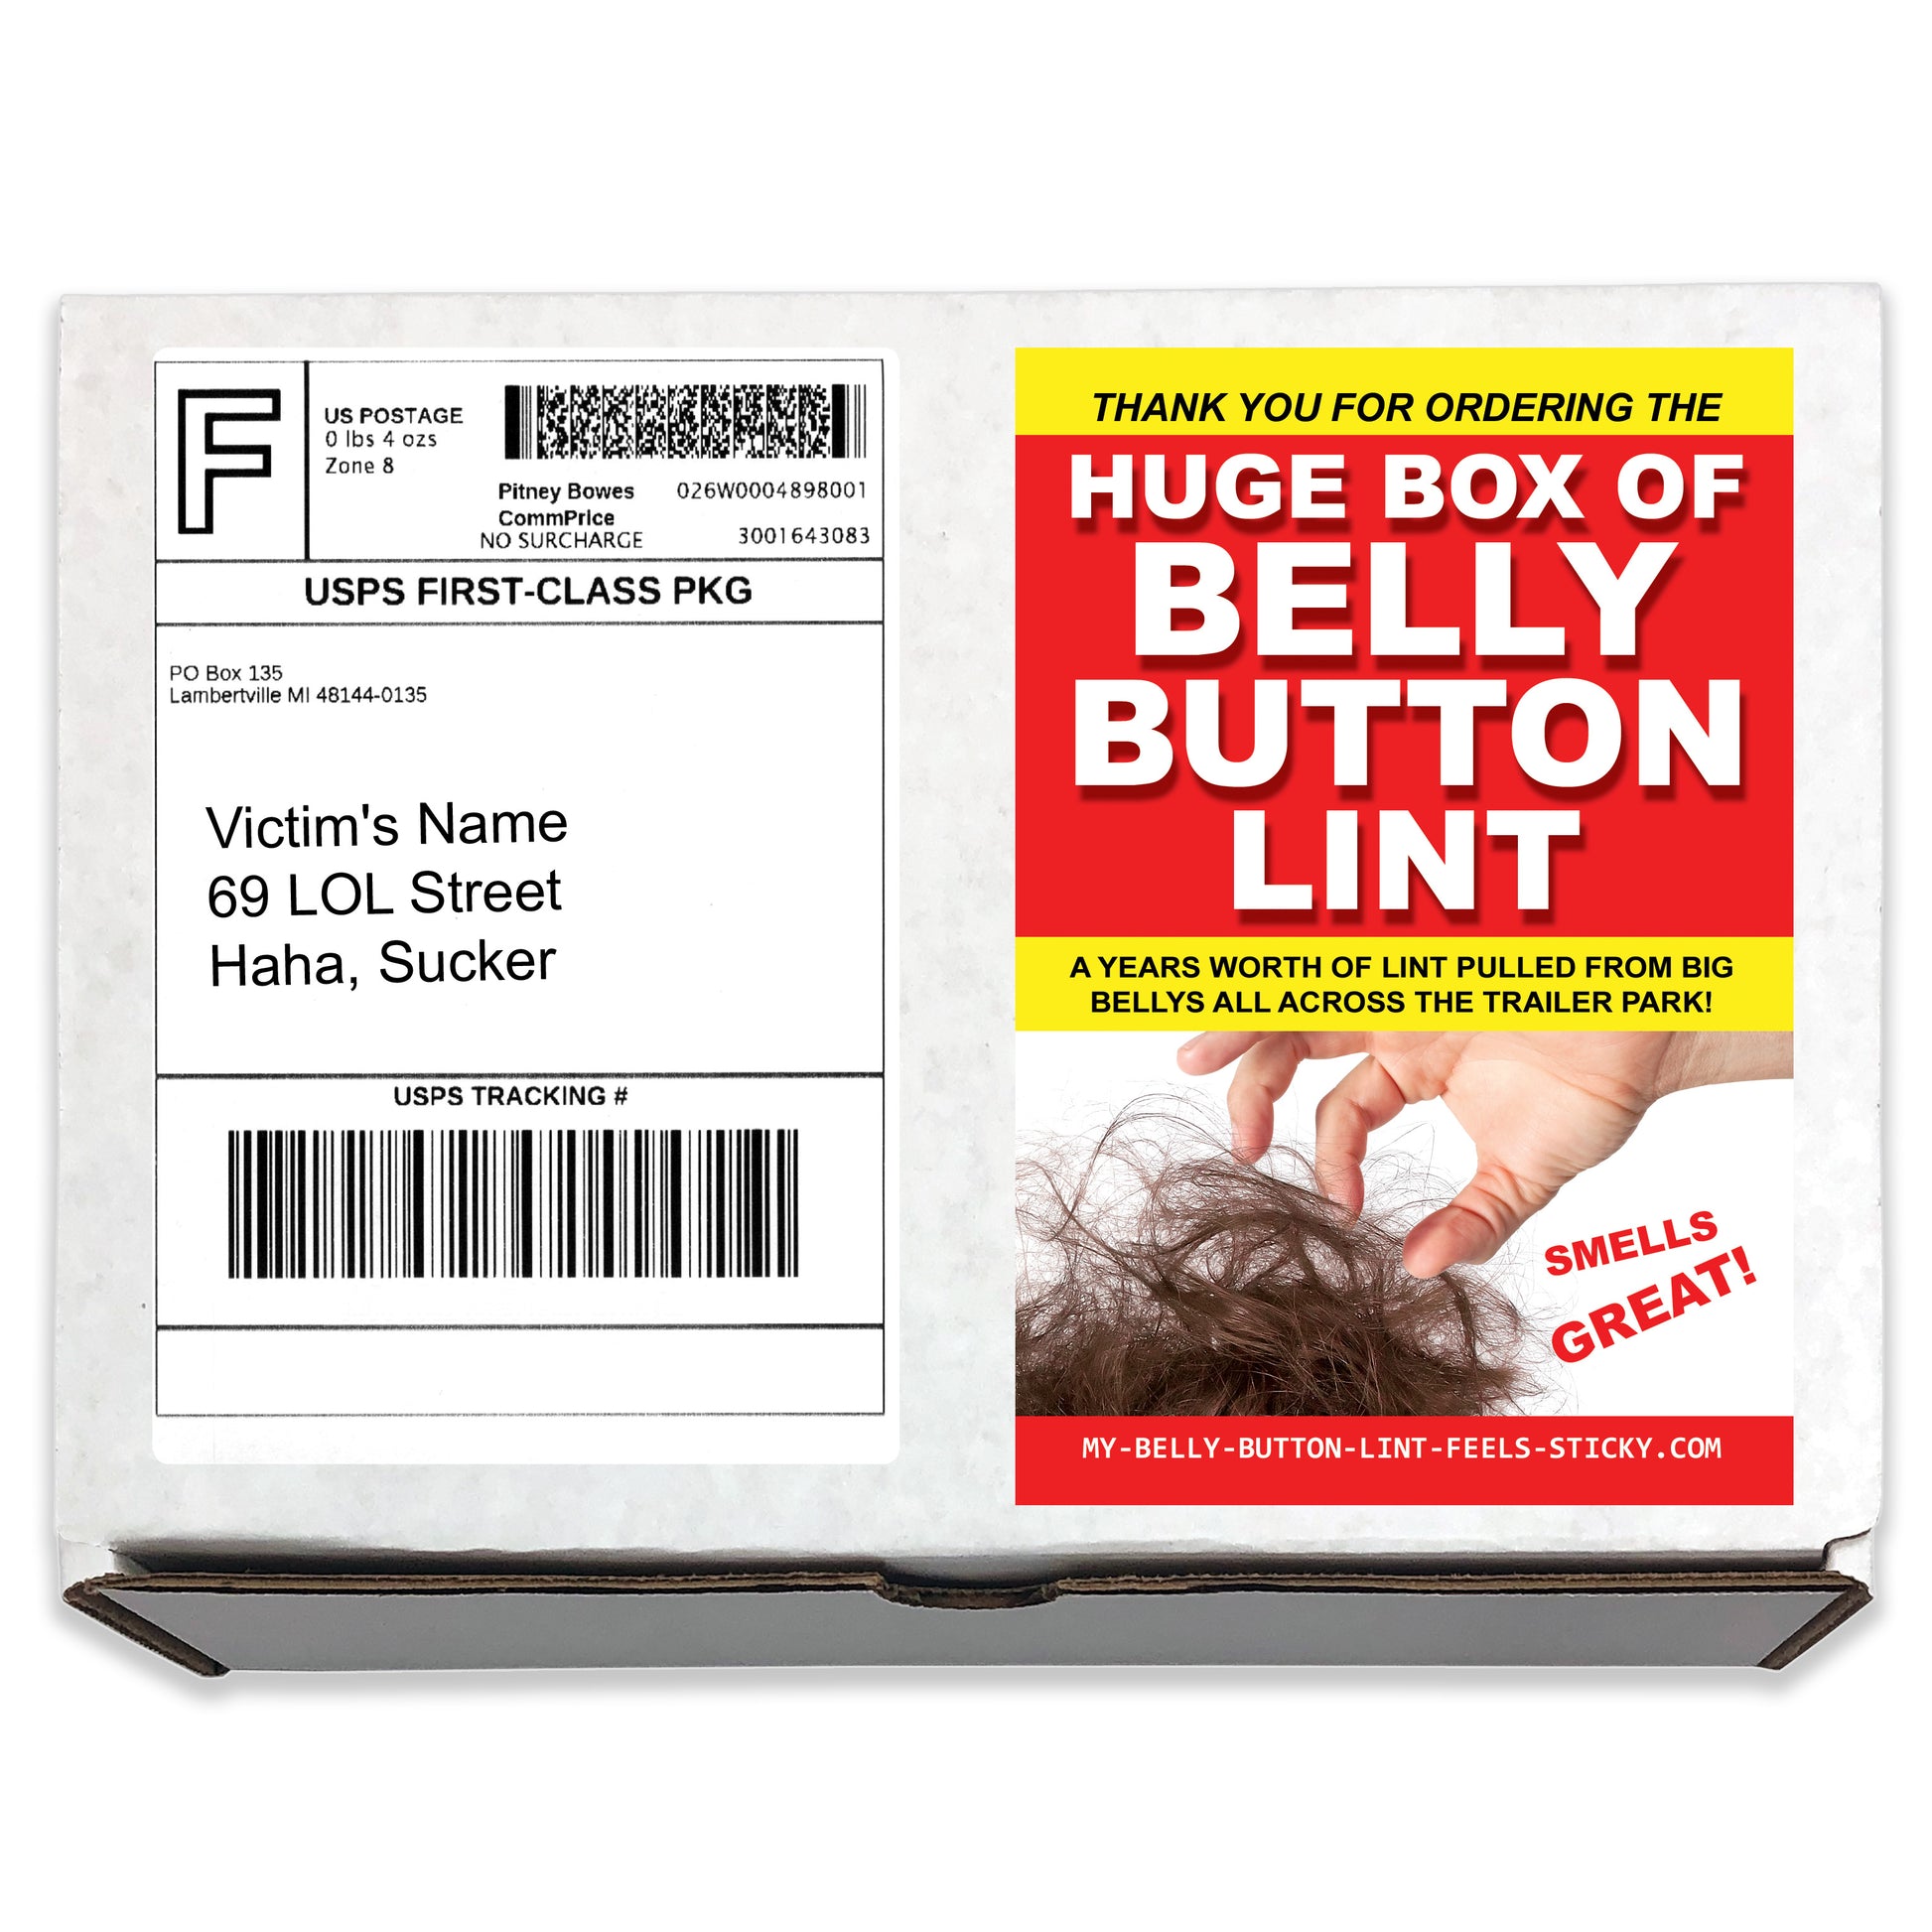 Huge Box of Belly Button Lint embarrassing prank box